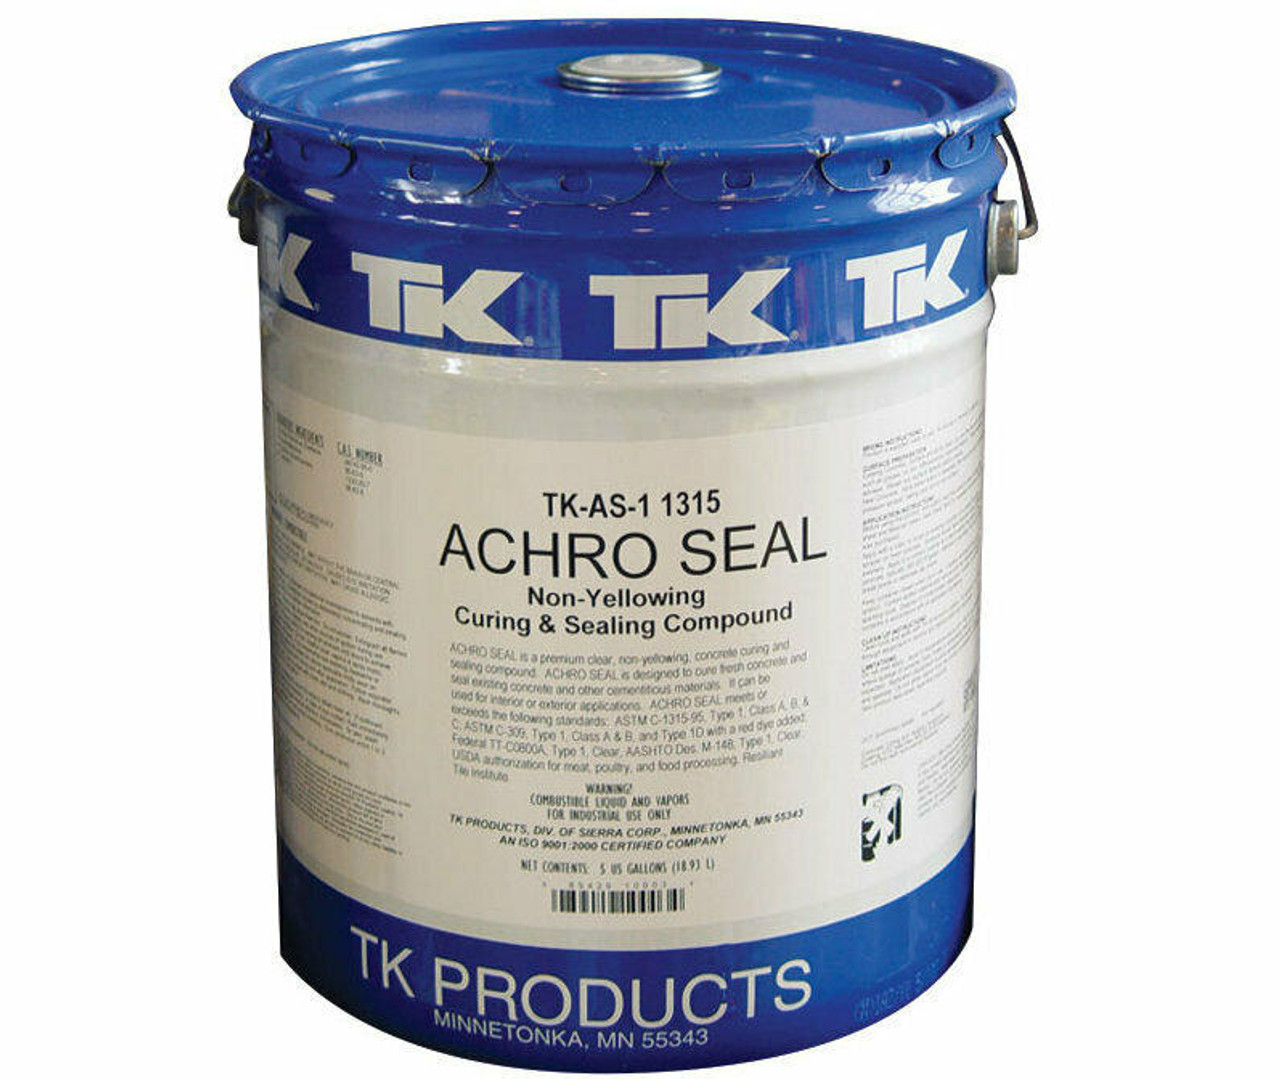 ASTM 1315 and ASTM C 309 Approved Concrete Cure and Seal